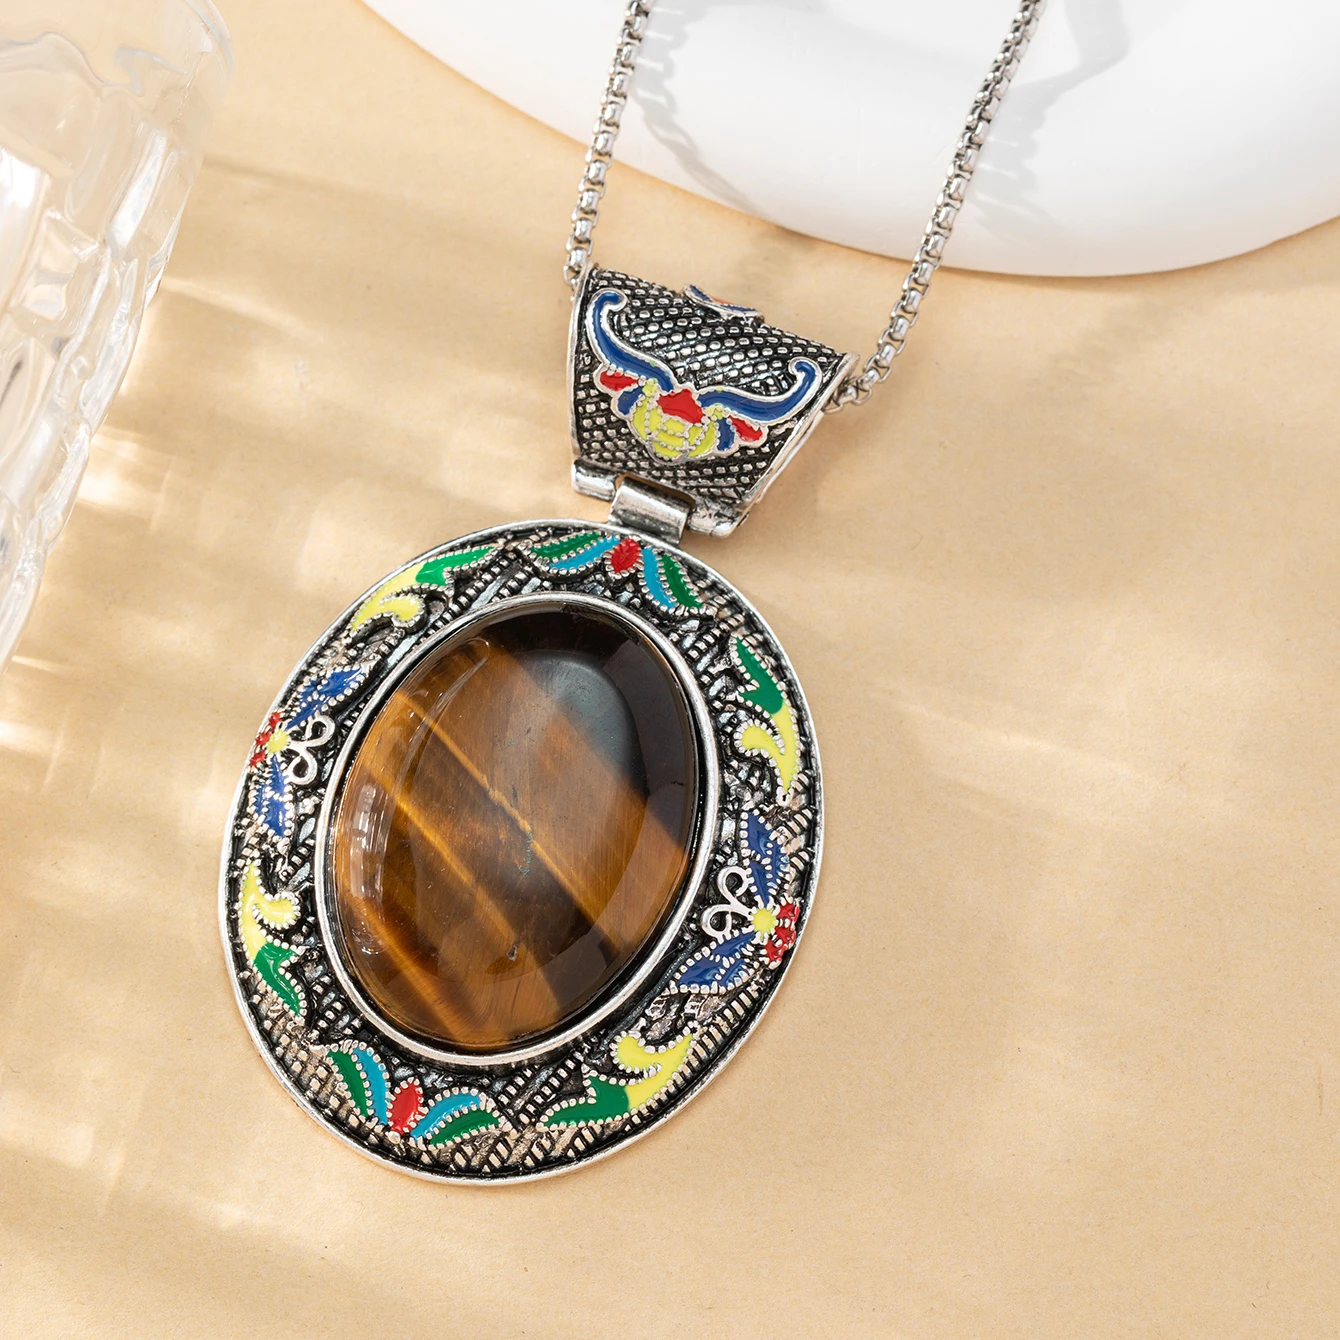 

Vintage Pendant Oval Natural Semi Precious Stone Tiger's Eye Pendant Necklace Metal Chain for Women's High-quality Jewelry Gift